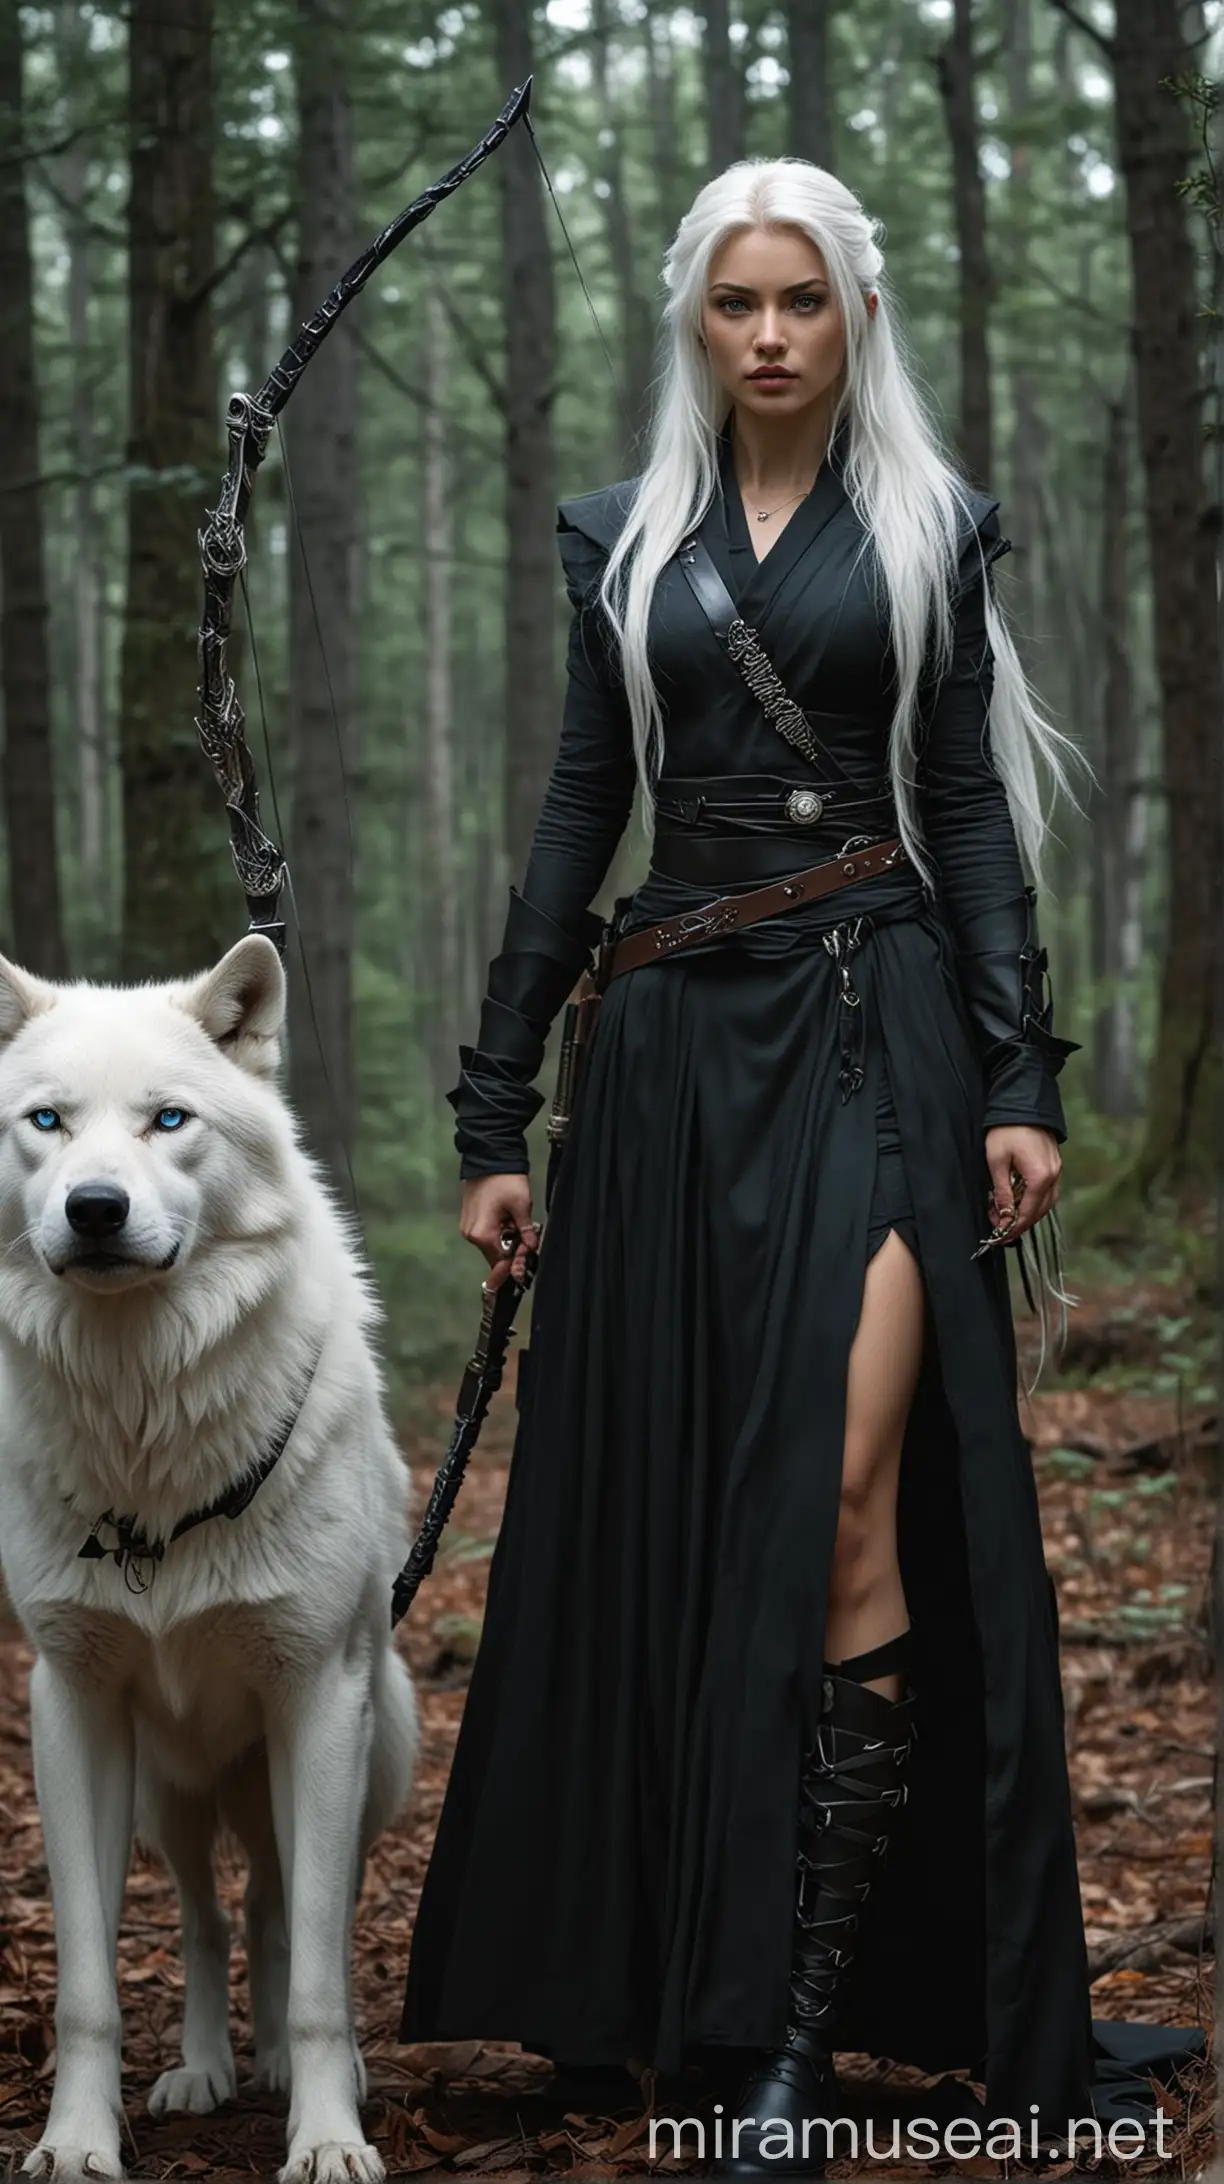 Moonlit Assassin Tanskinned Woman with White Wolf in Forest